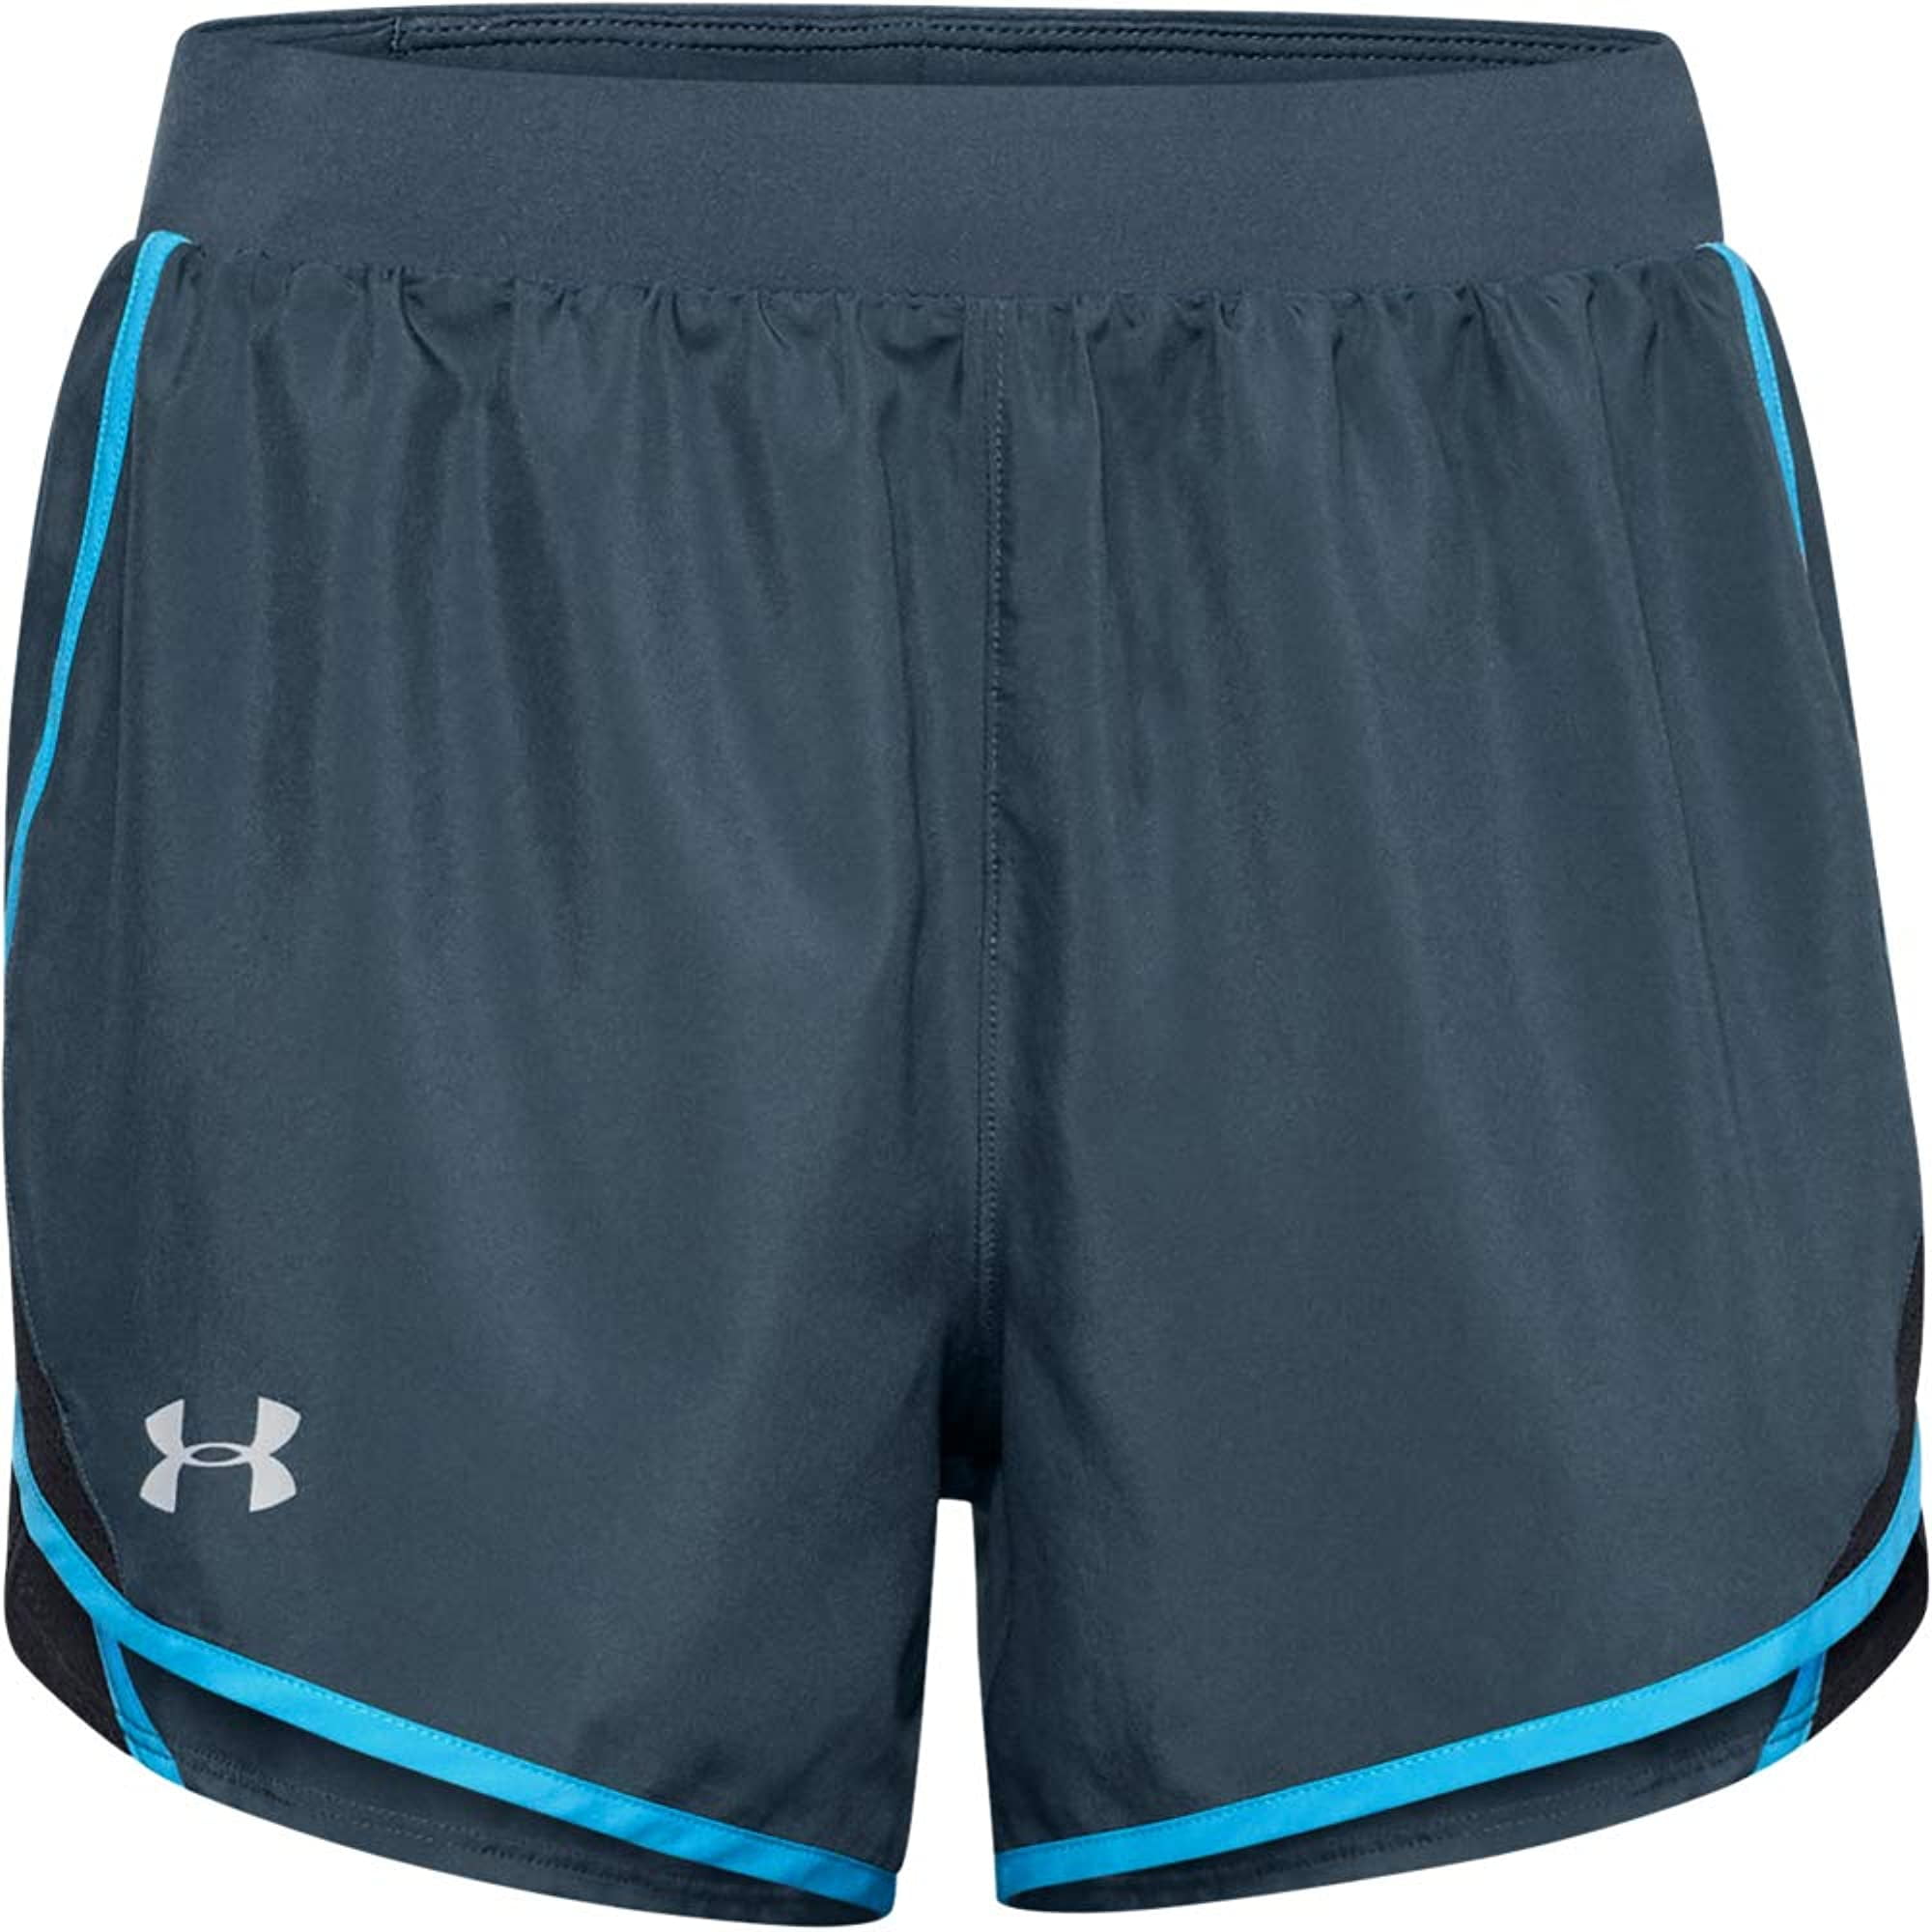 Under Armour Womens Fly By 2.0 Printed Shorts Pants Trousers Bottoms Blue Sports